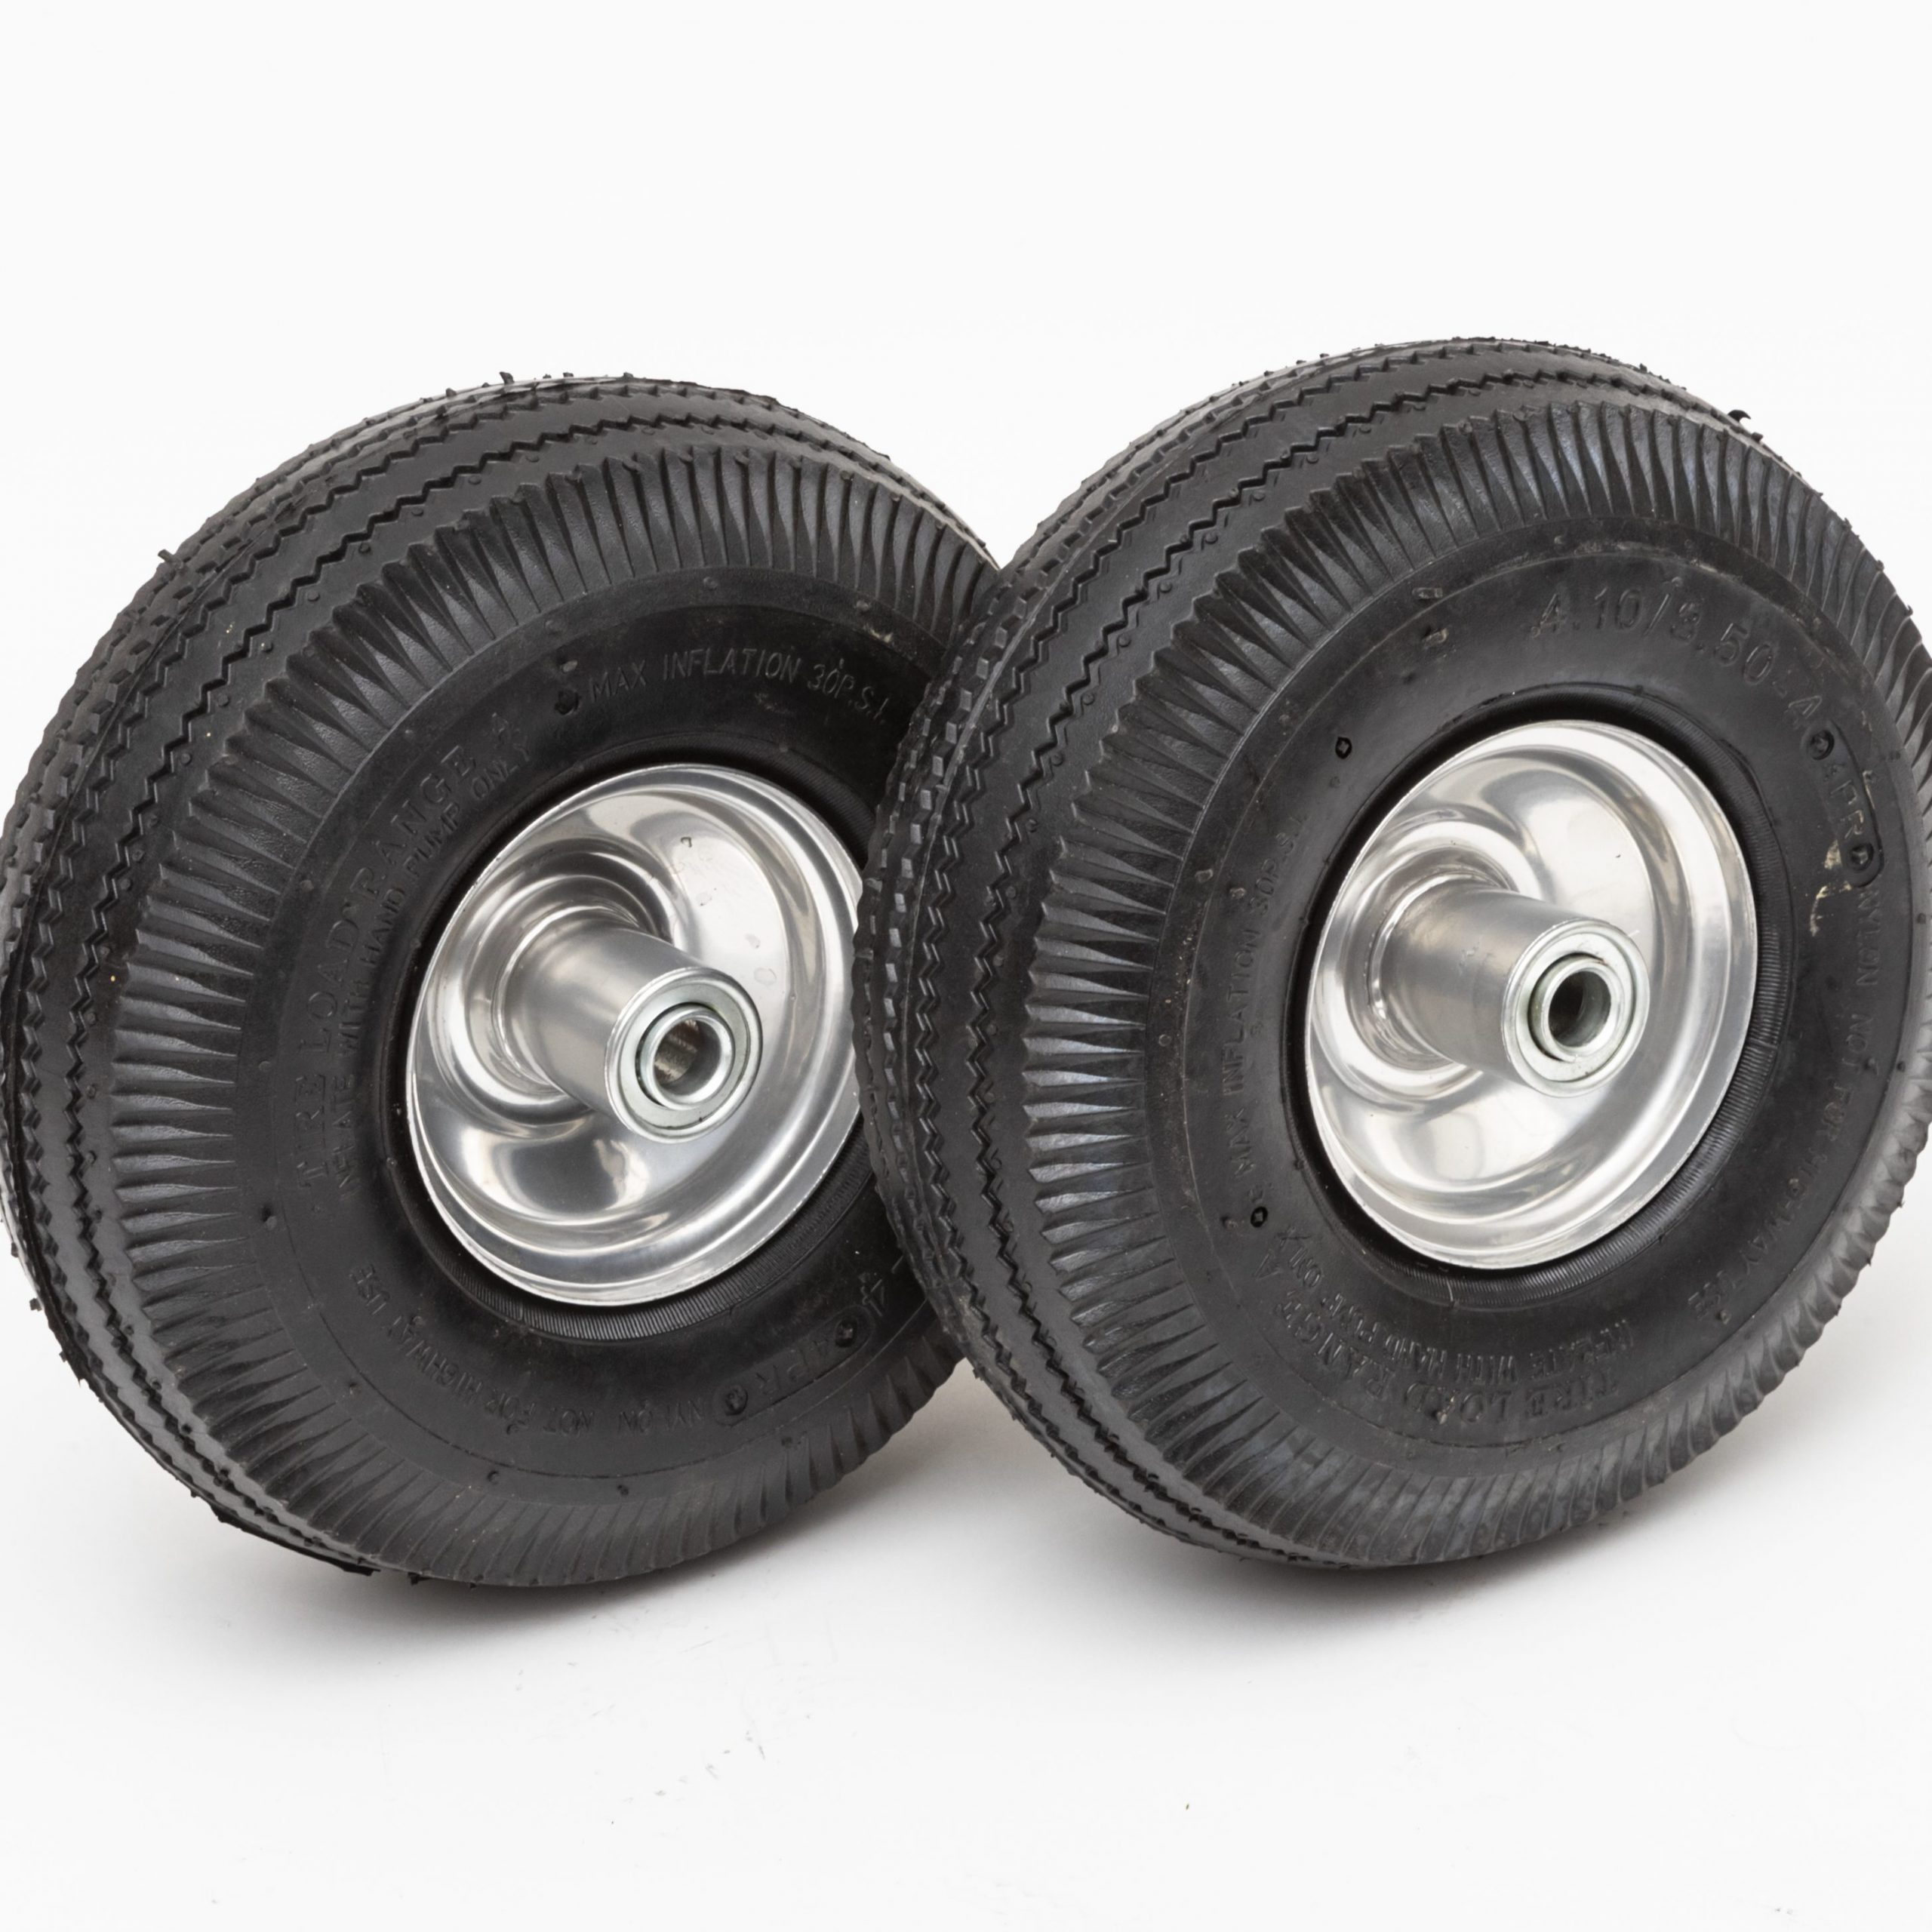 Set of TWO-10" Pneumatic tires-4-ply tubed-5/8" bearings-Hand-trucks/carts/wagon 